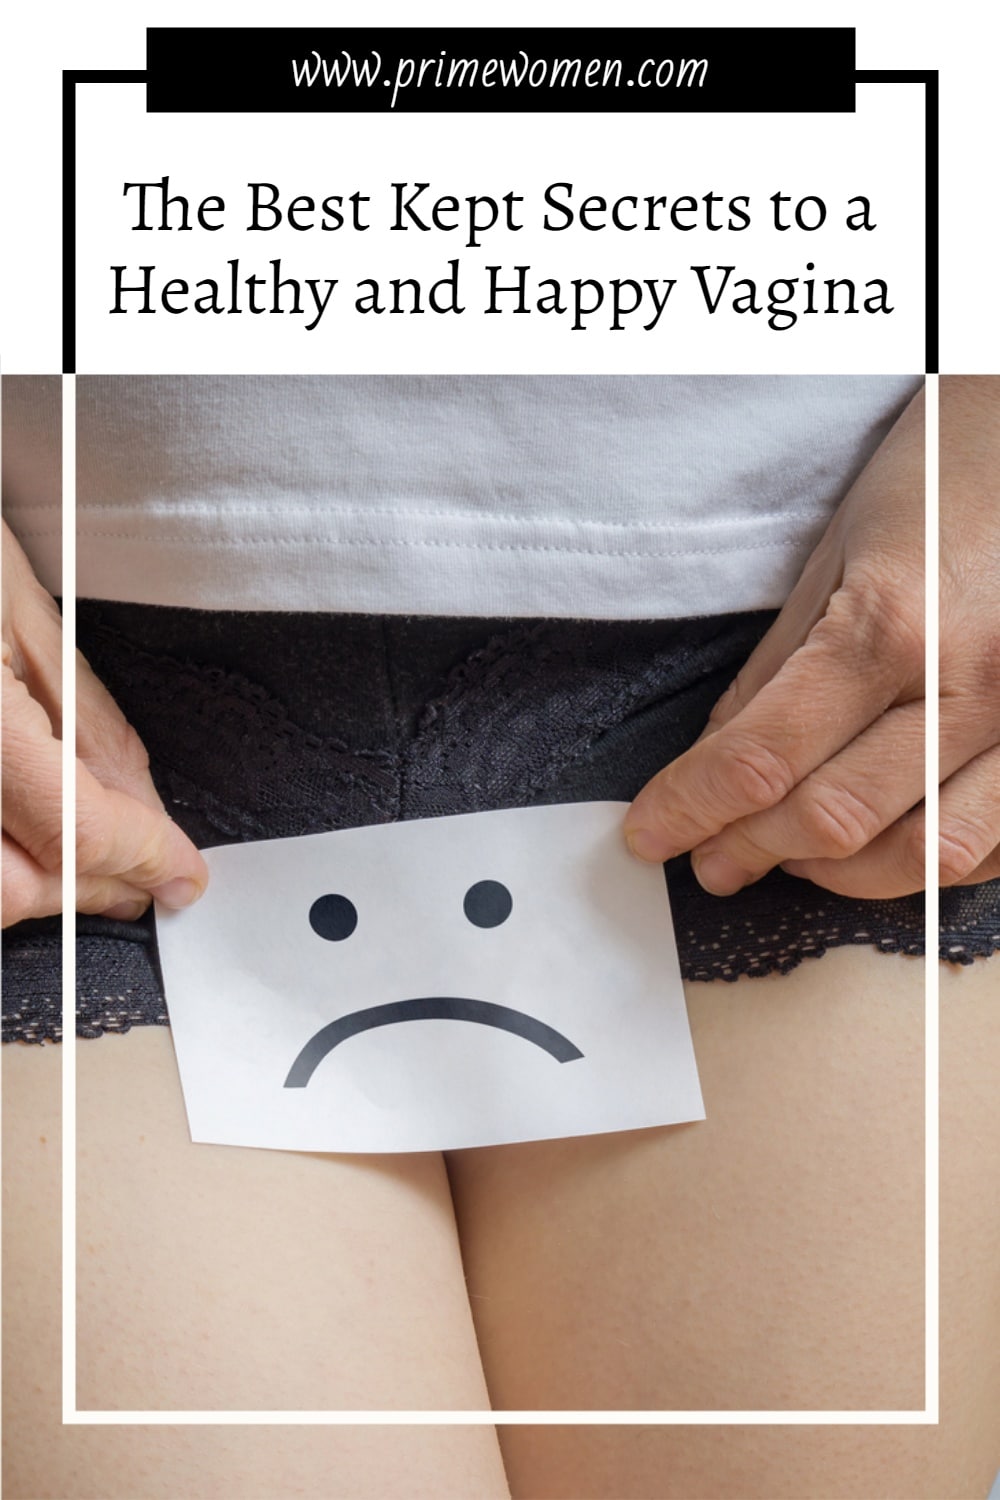 The-Best-Kept-Secrets-to-a-Healthy-and-Happy-Vagina